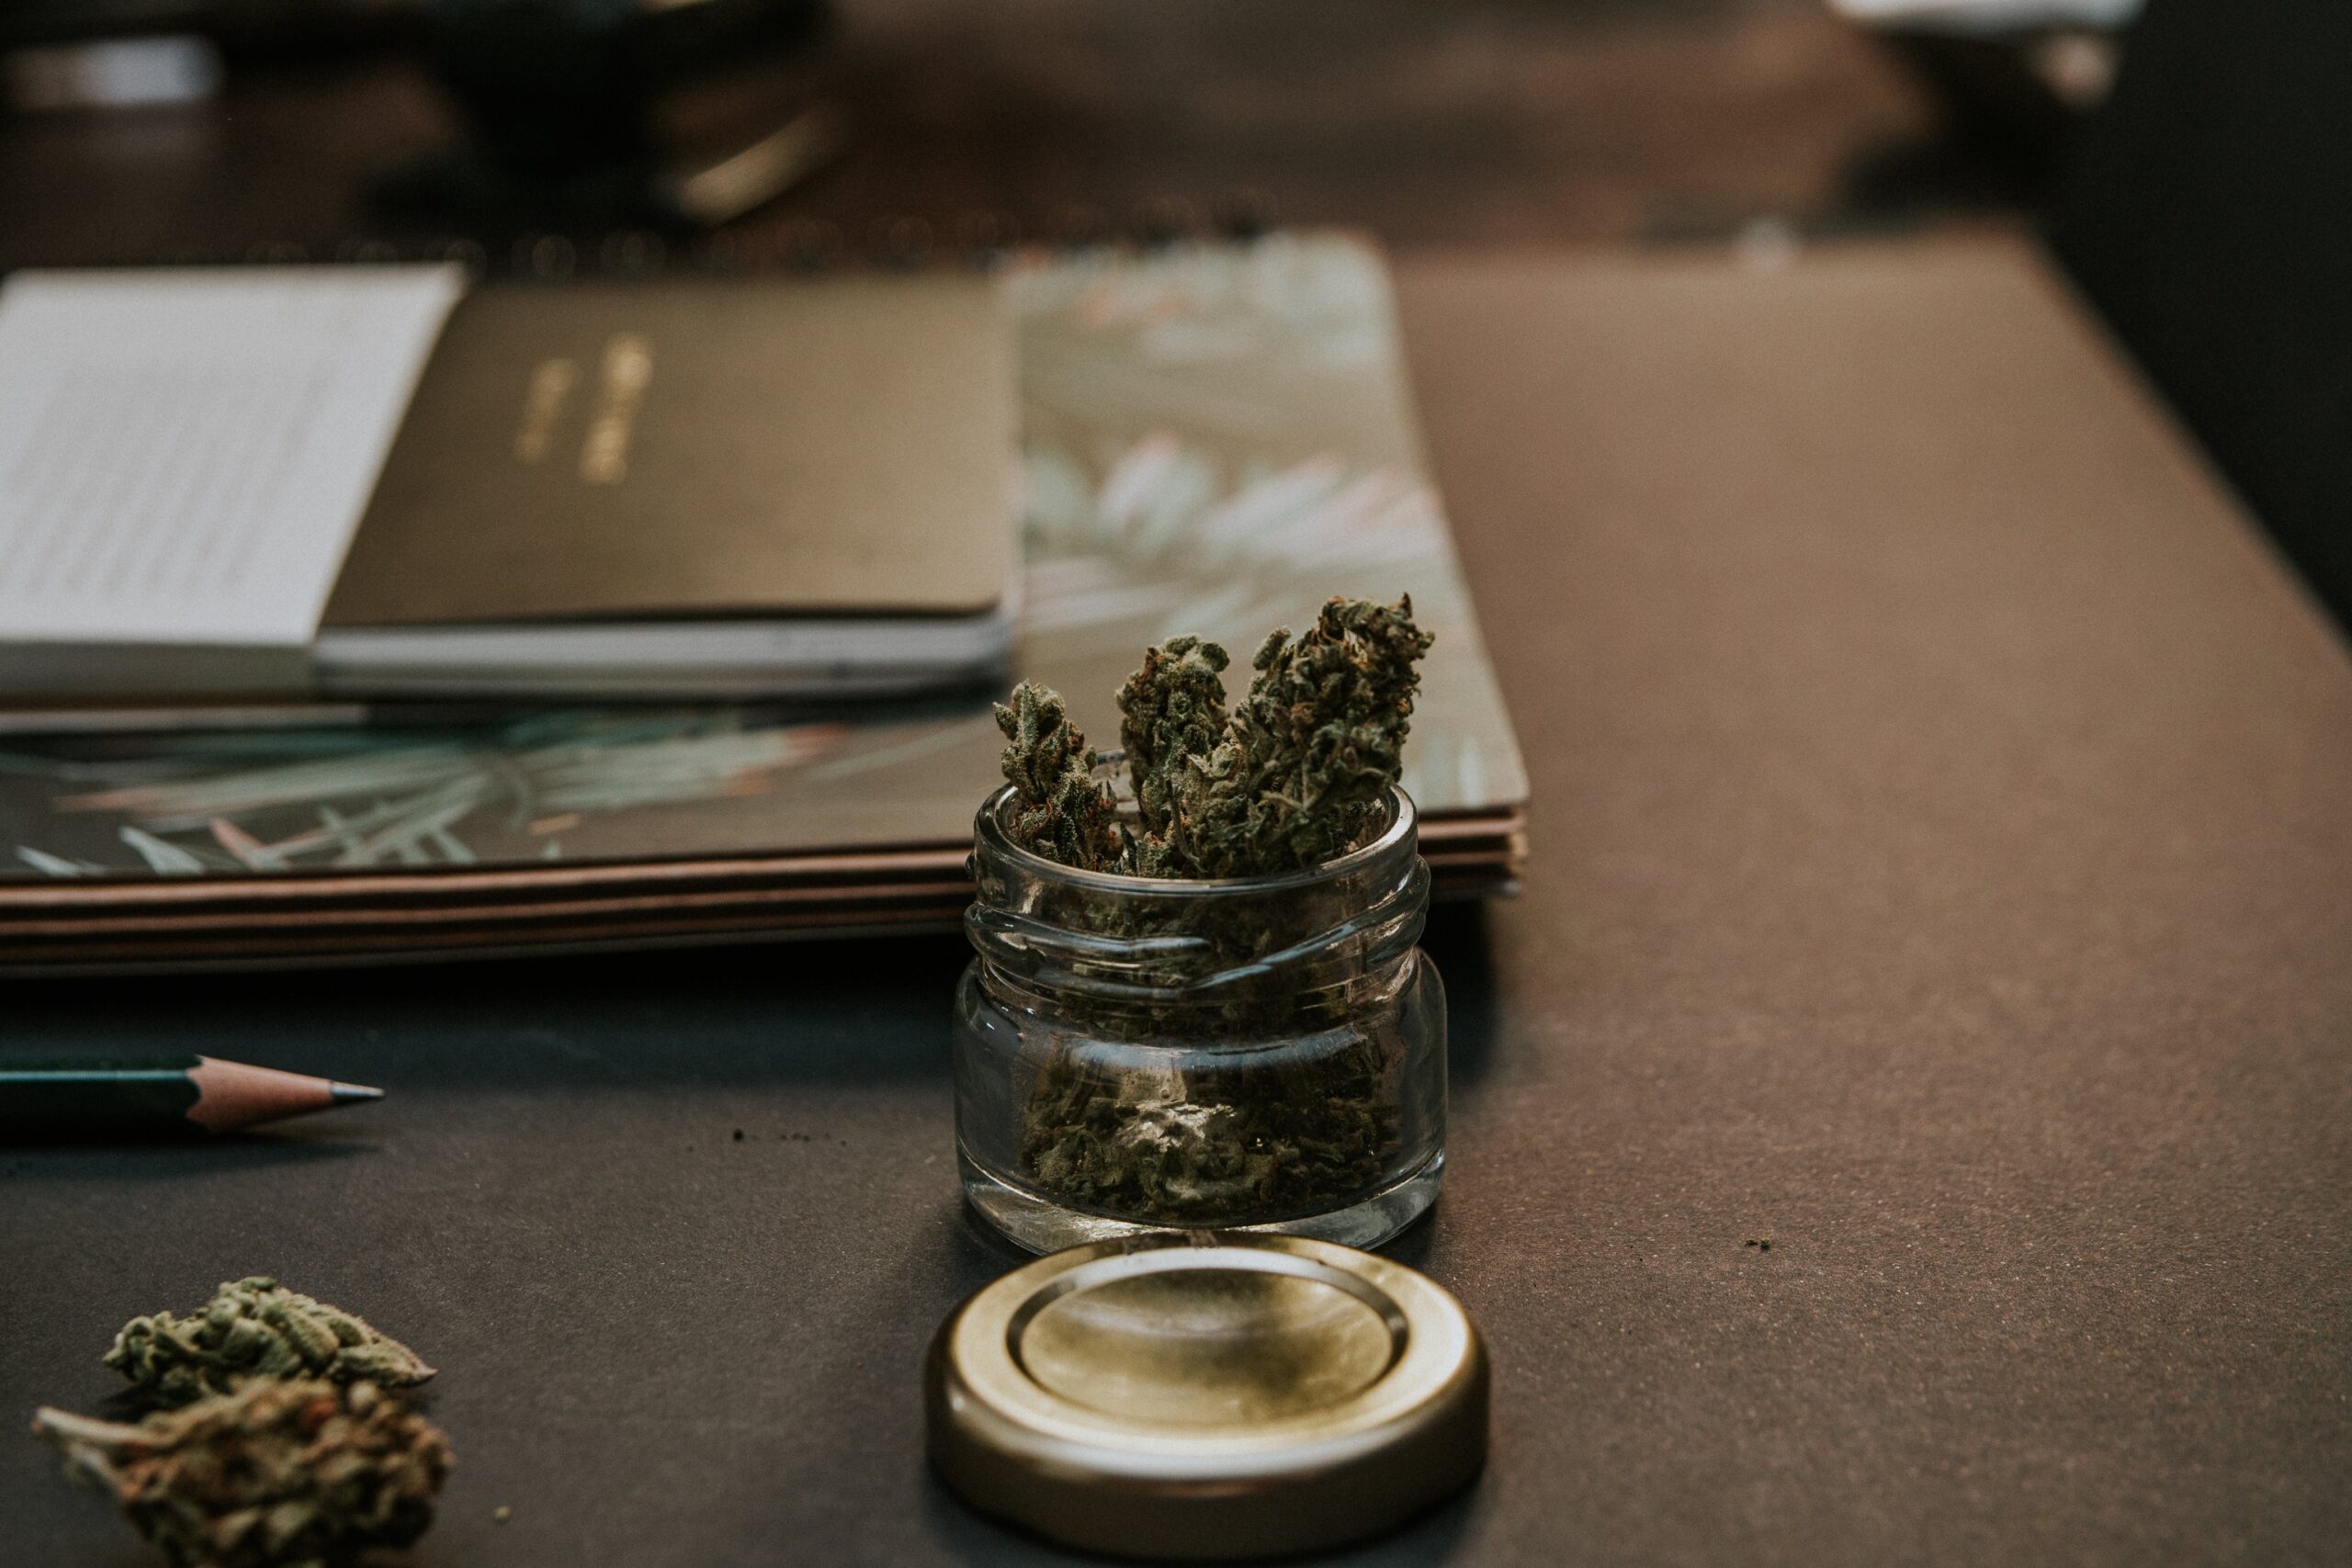 MSO and Co is making cannabis business setup easy with smooth documentation & licensing.